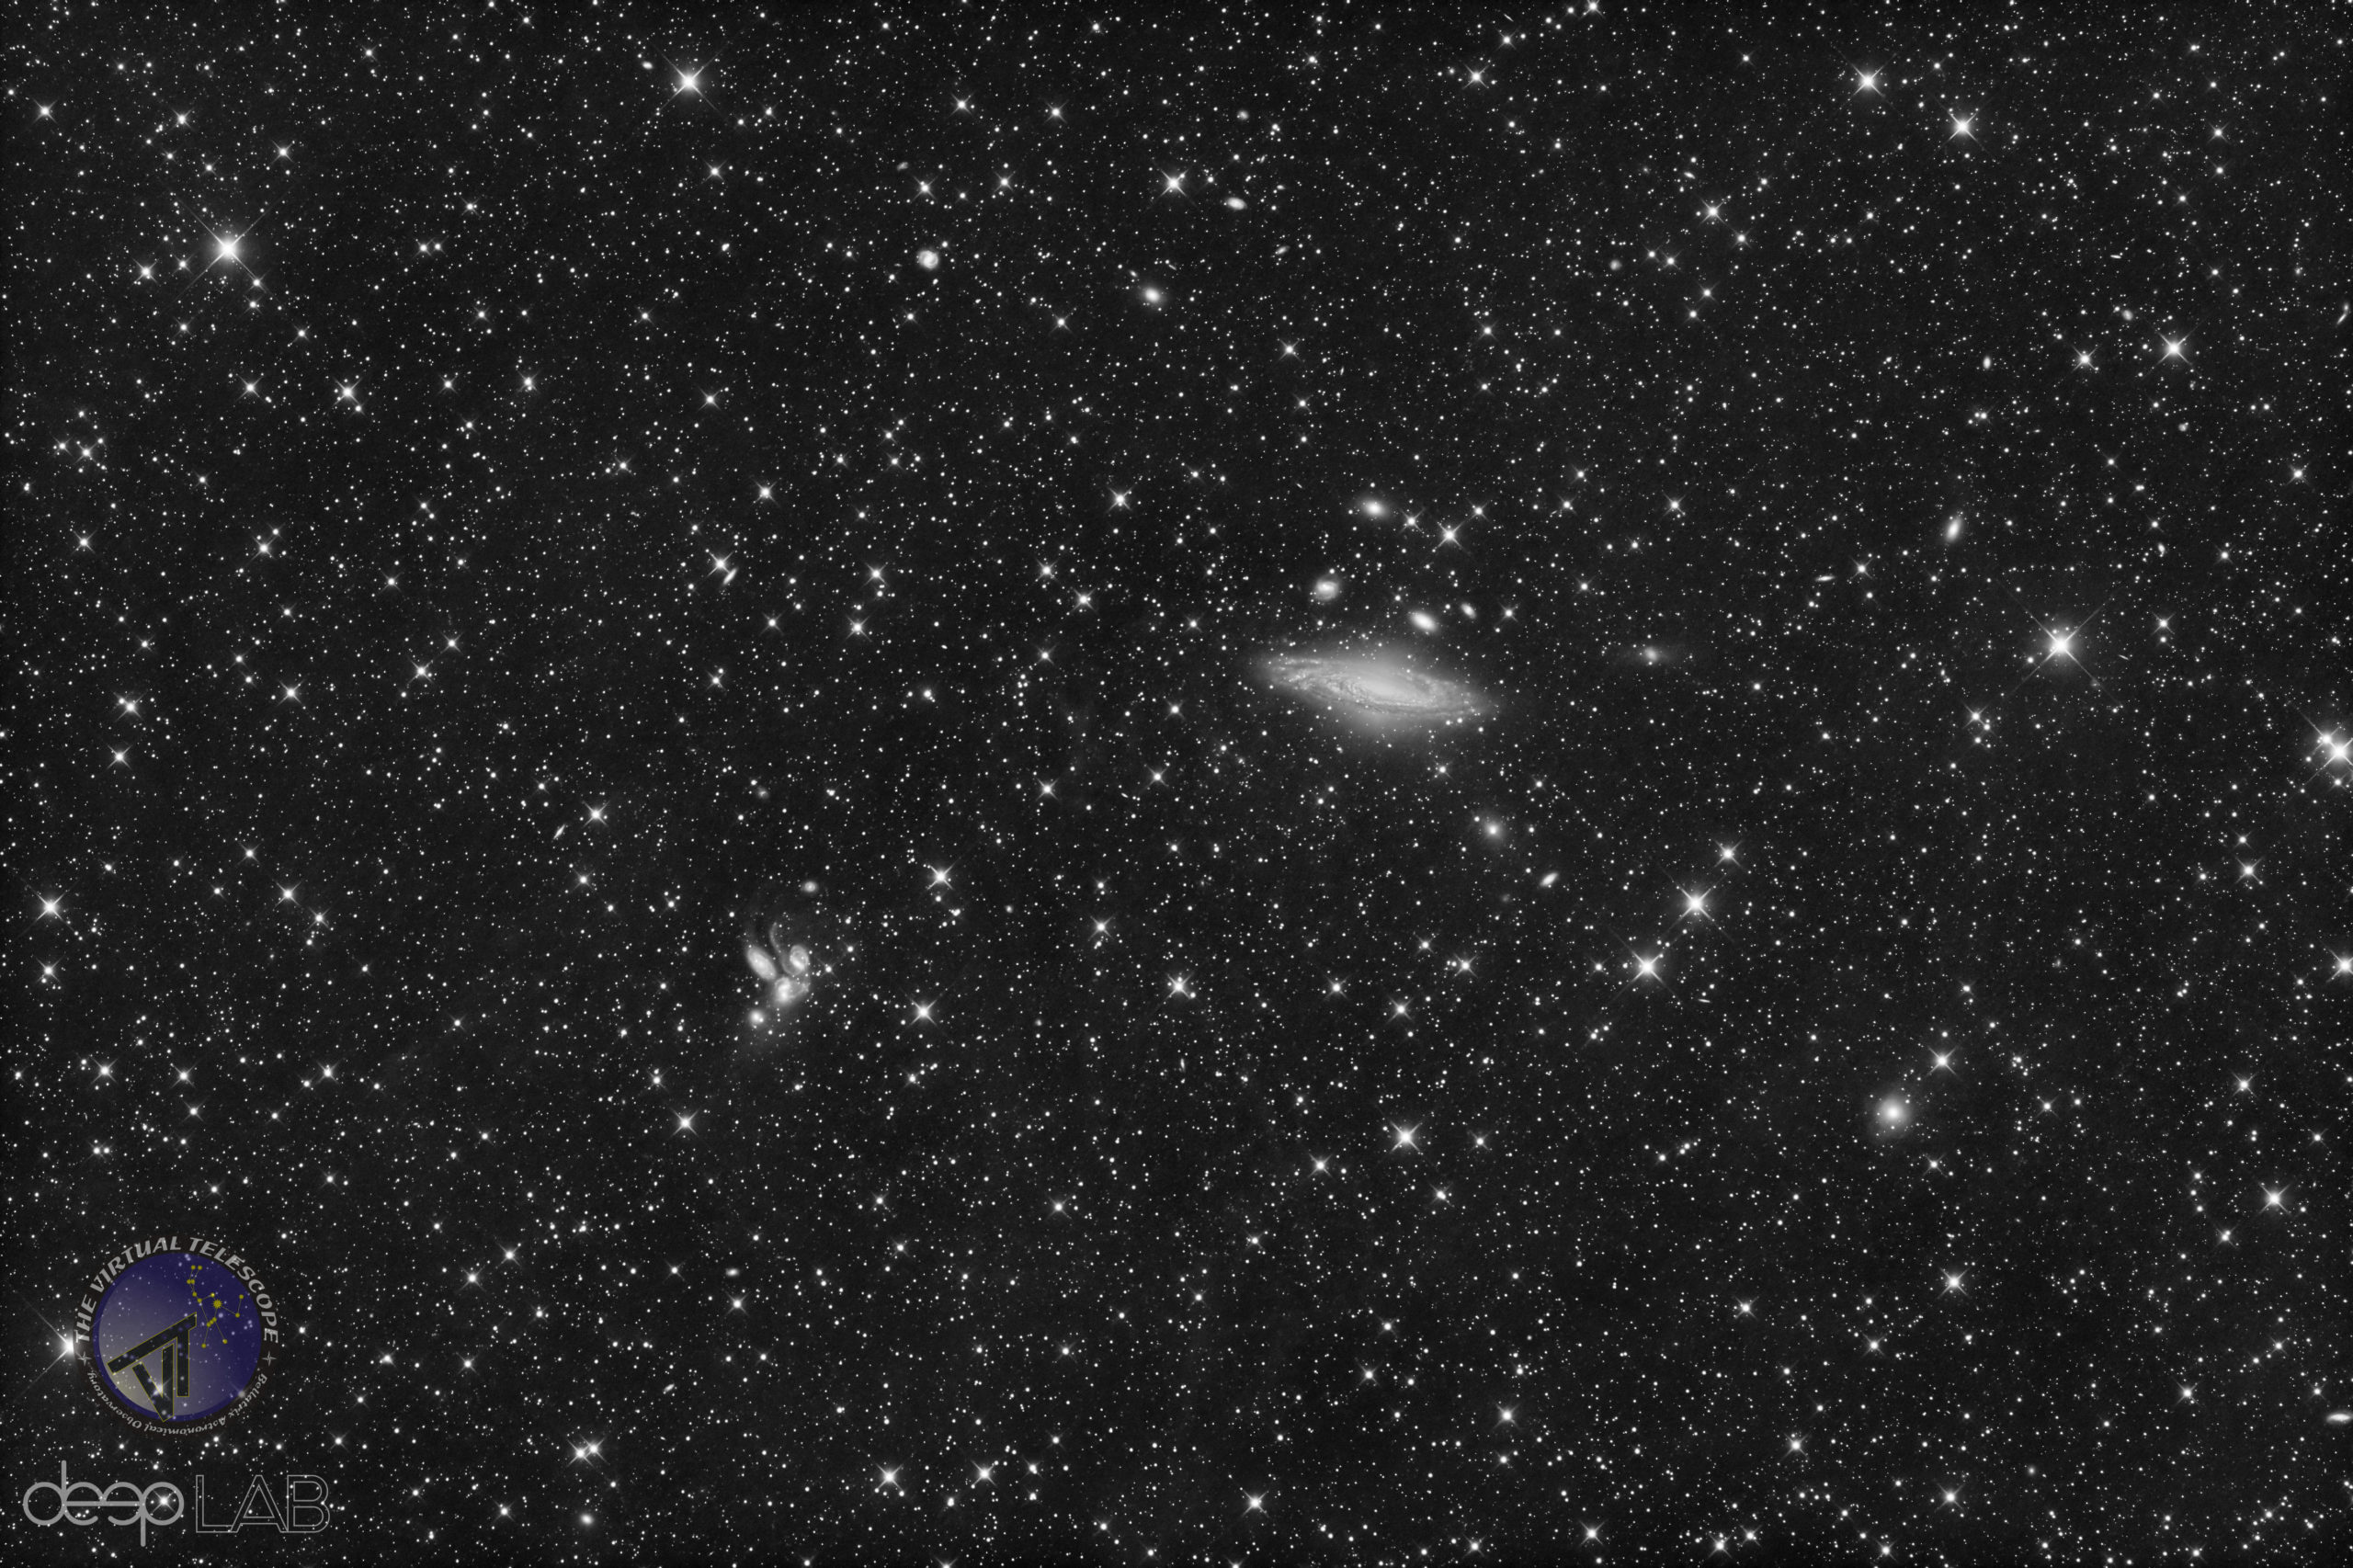 NGC 7331, a few background galaxies and the Stephan's Quintet.